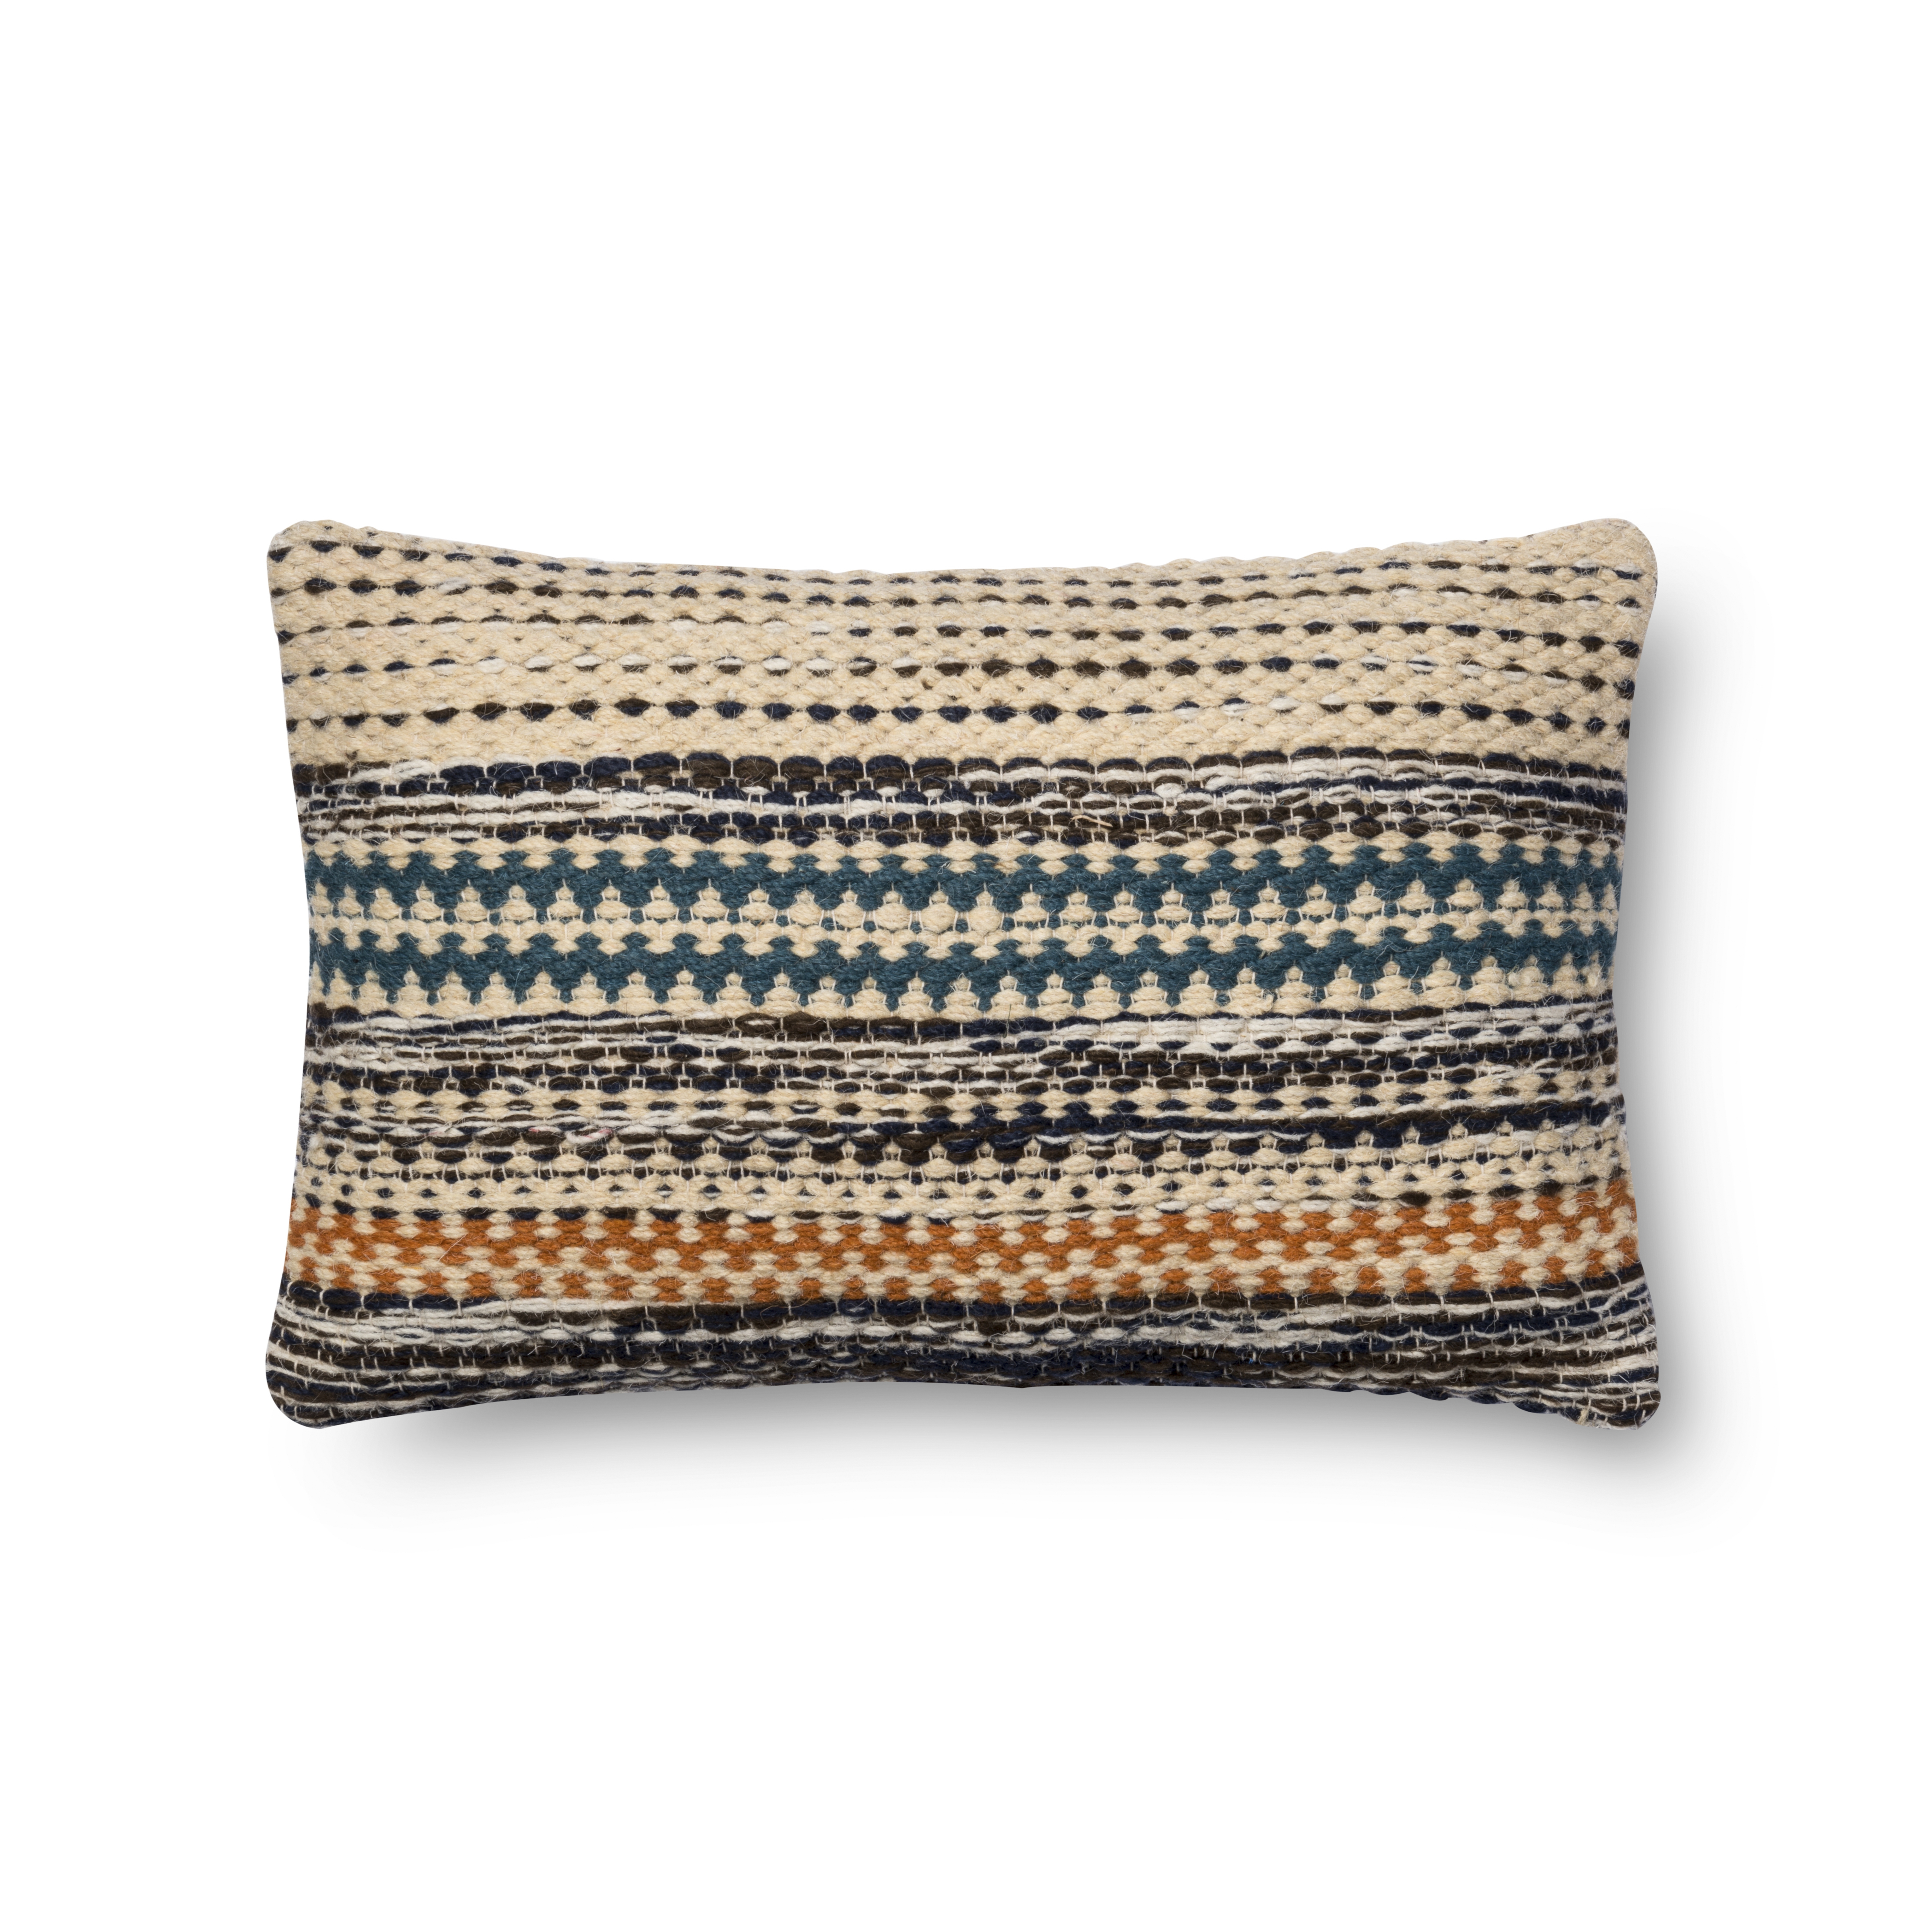 Magnolia Home by Joanna Gaines PILLOWS P1009 ORANGE / BLUE 13" x 21" Cover Only - Magnolia Home by Joana Gaines Crafted by Loloi Rugs